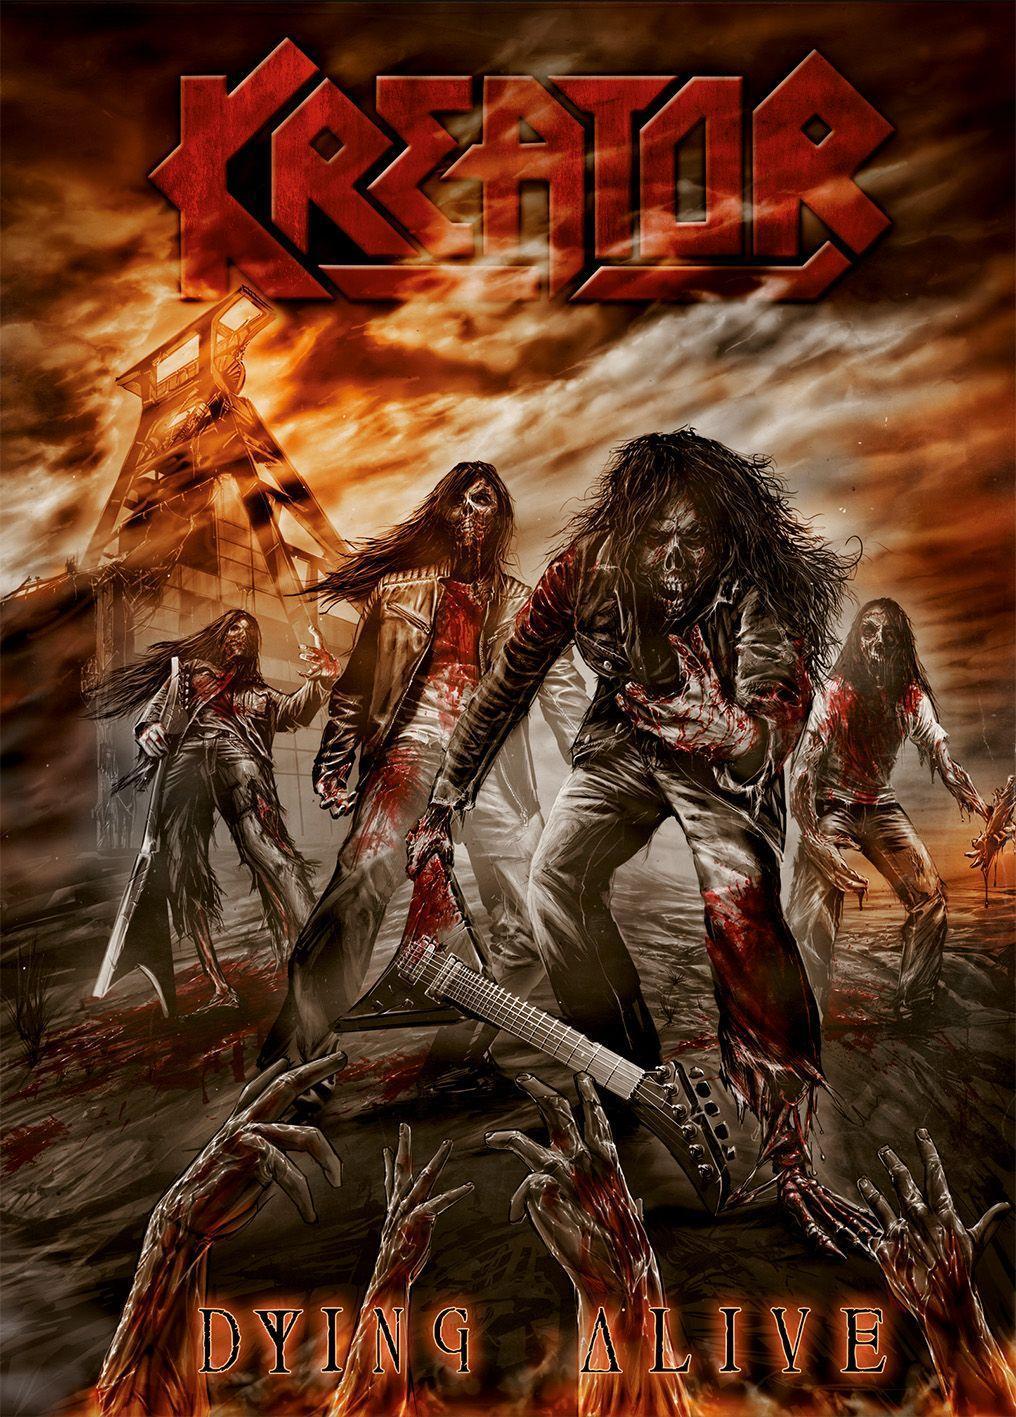 image about Kreator